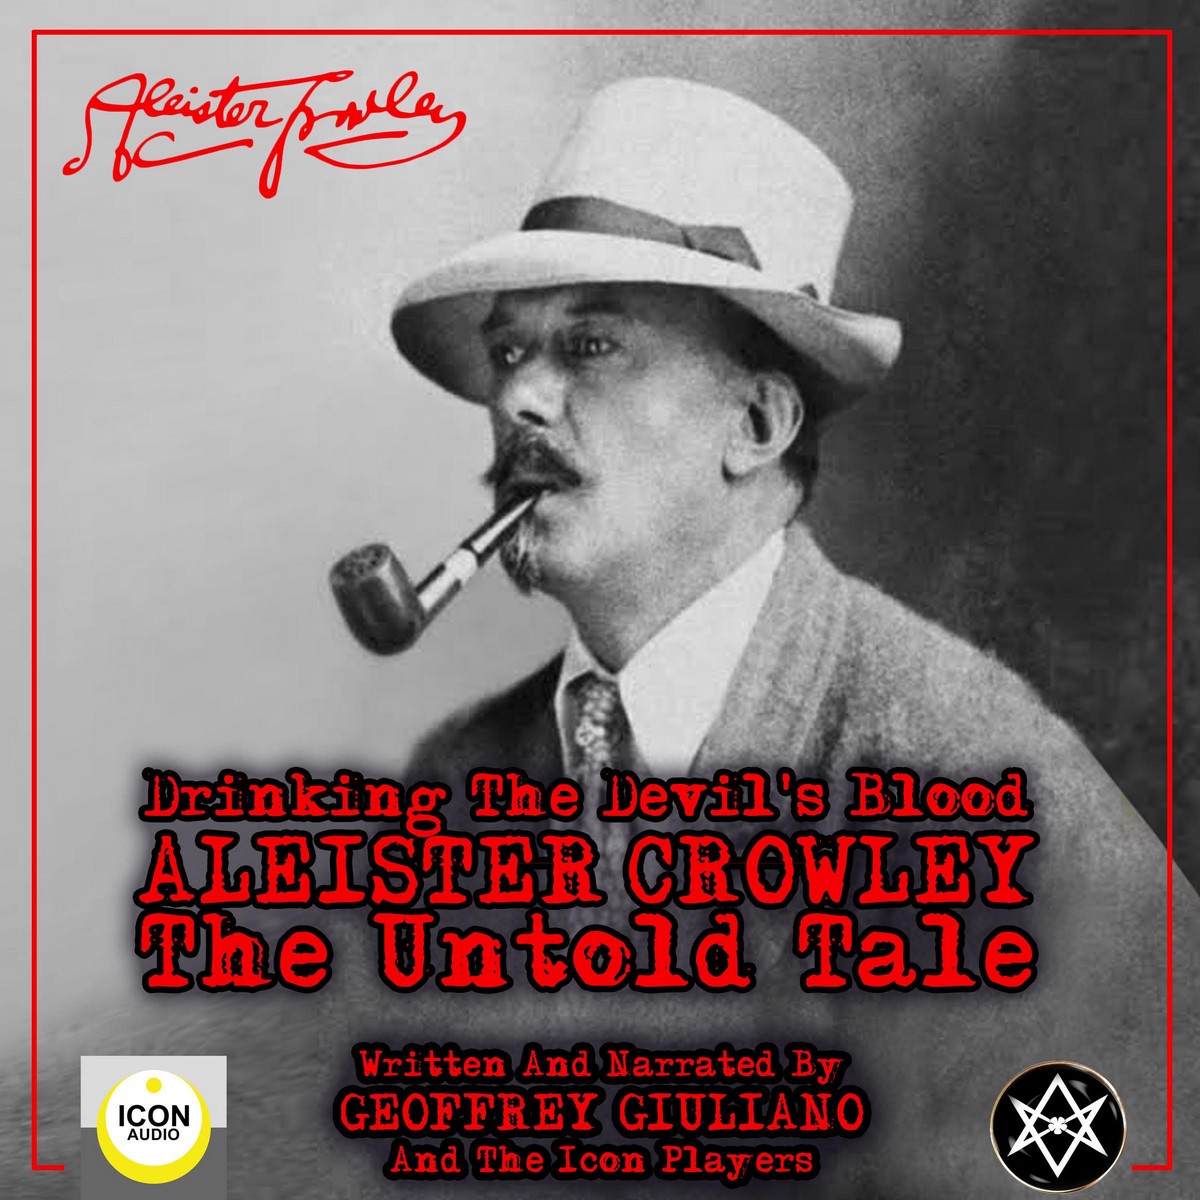 Drinking the Devil’s Blood; Aleister Crowley, The Untold Tale